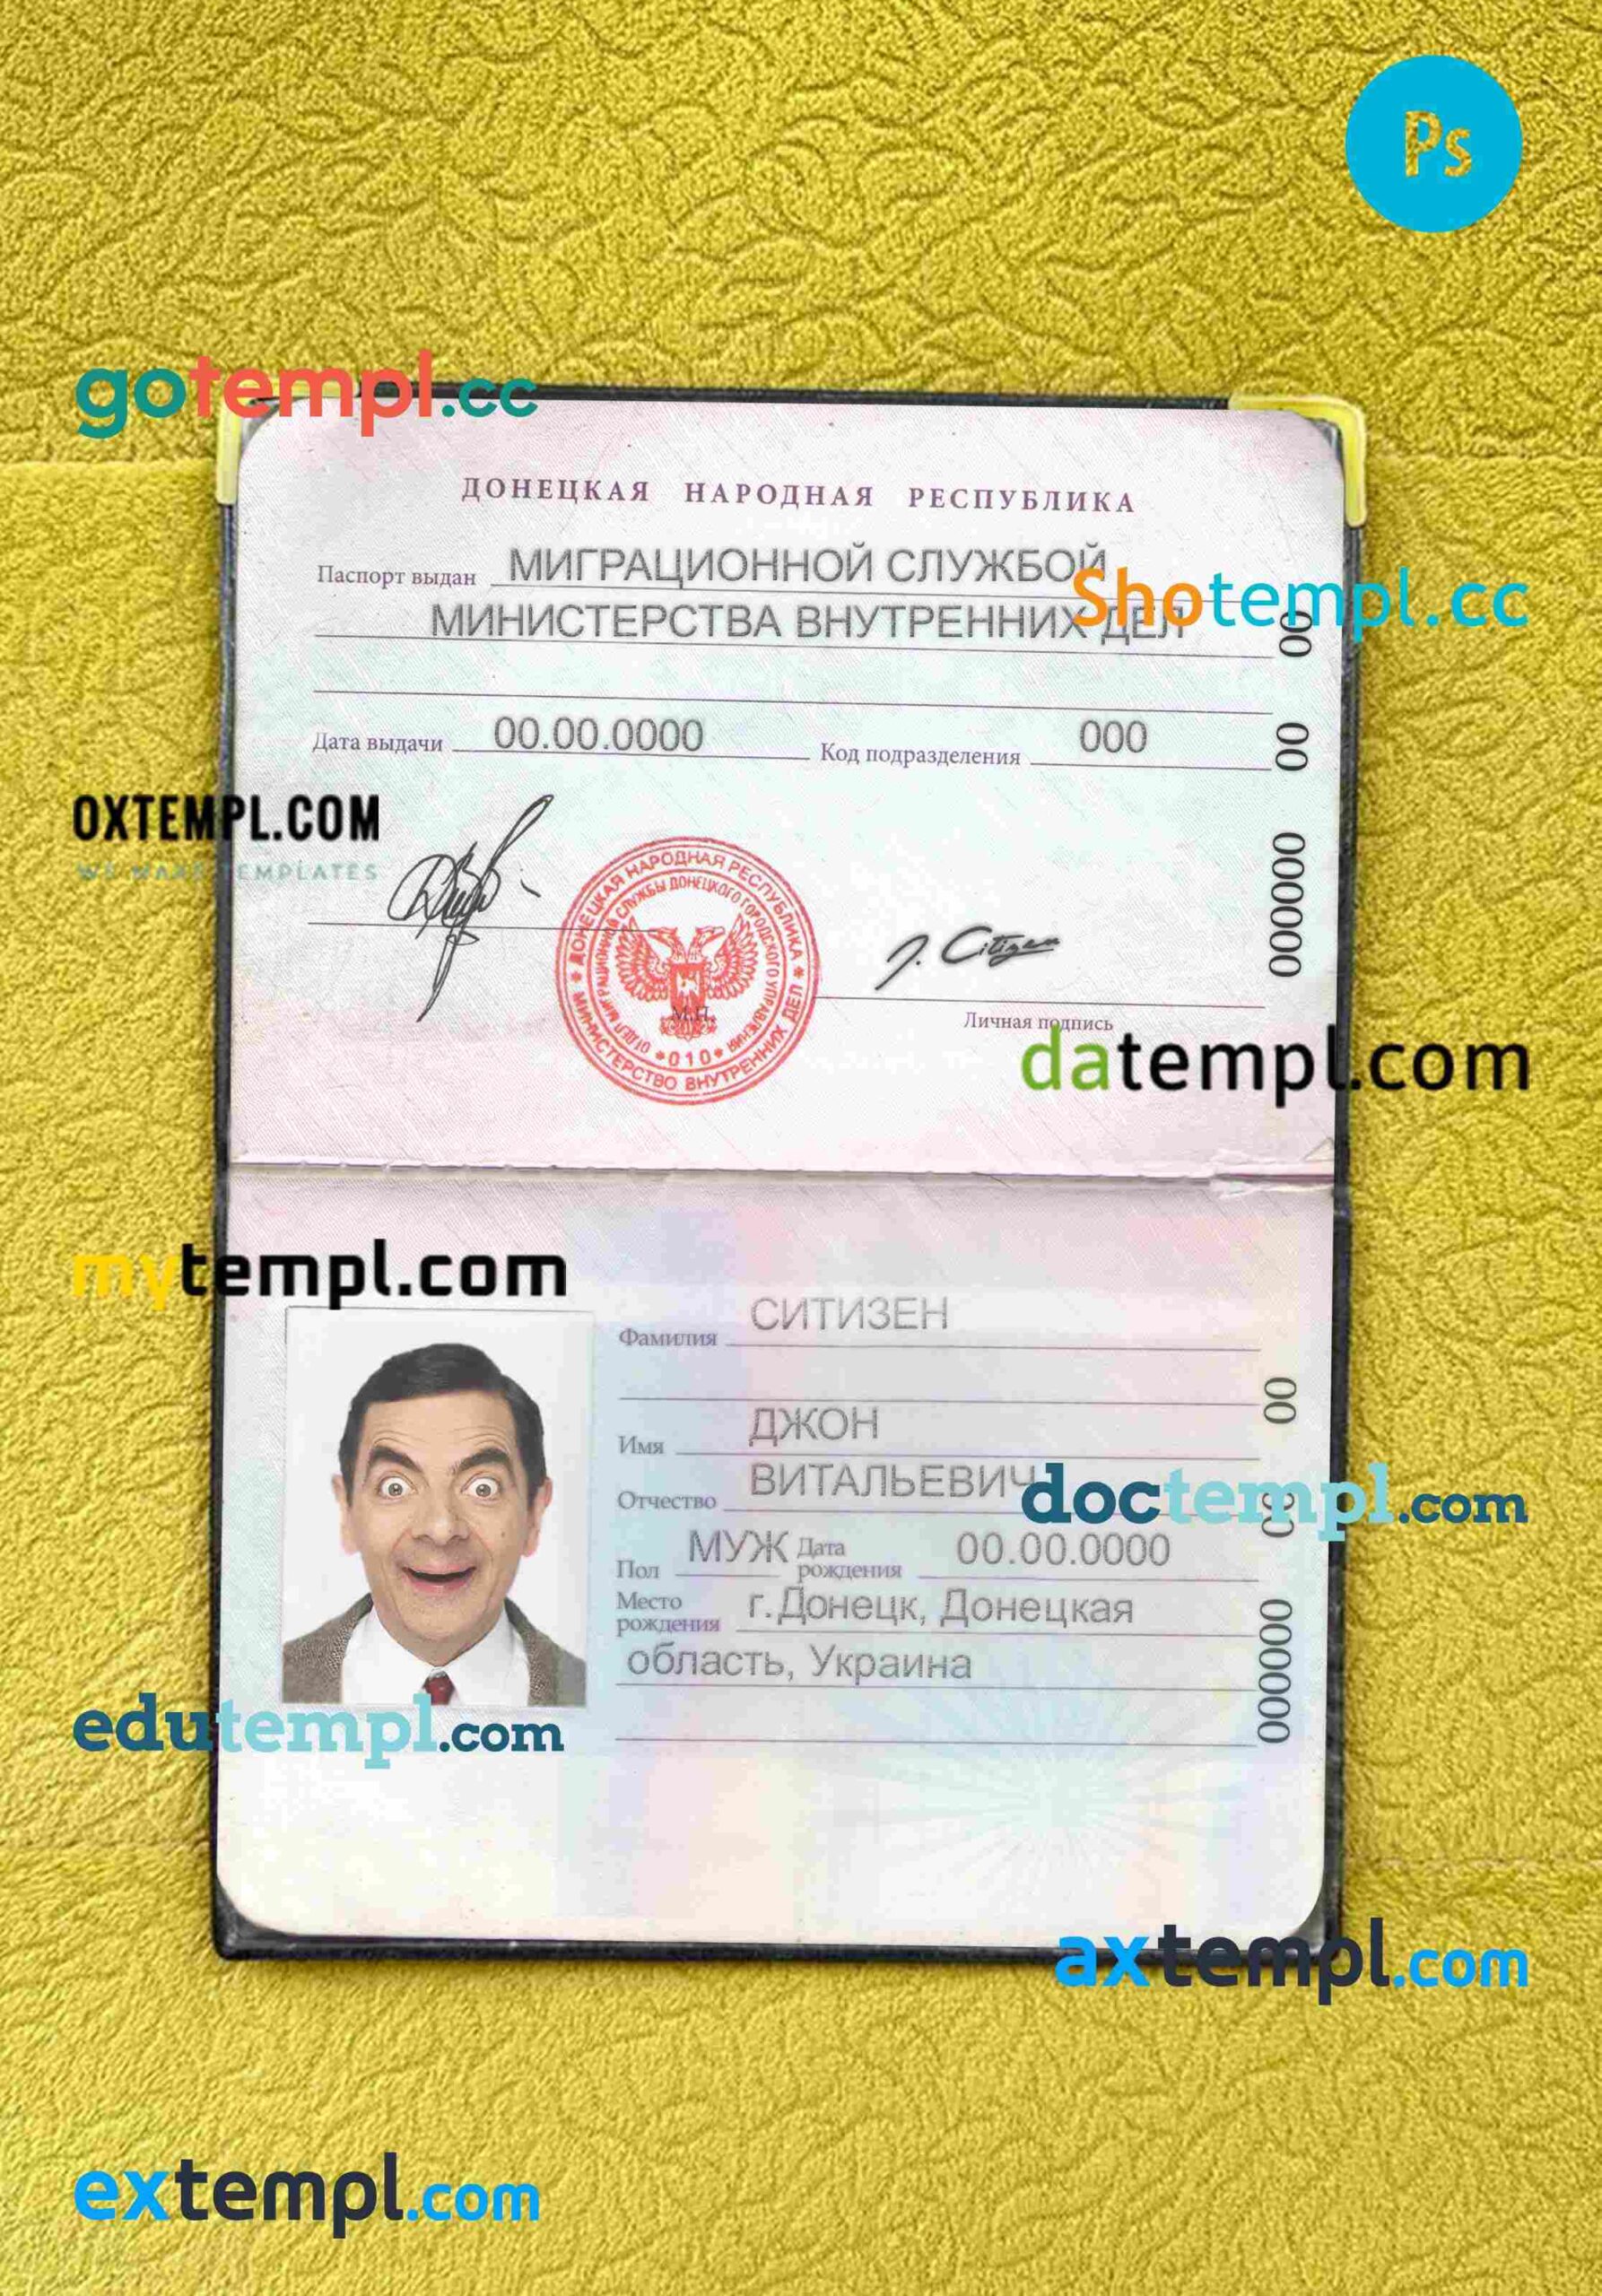 Donetsk People s Republic passport PSD files, scan and photo look templates, 2 in 1